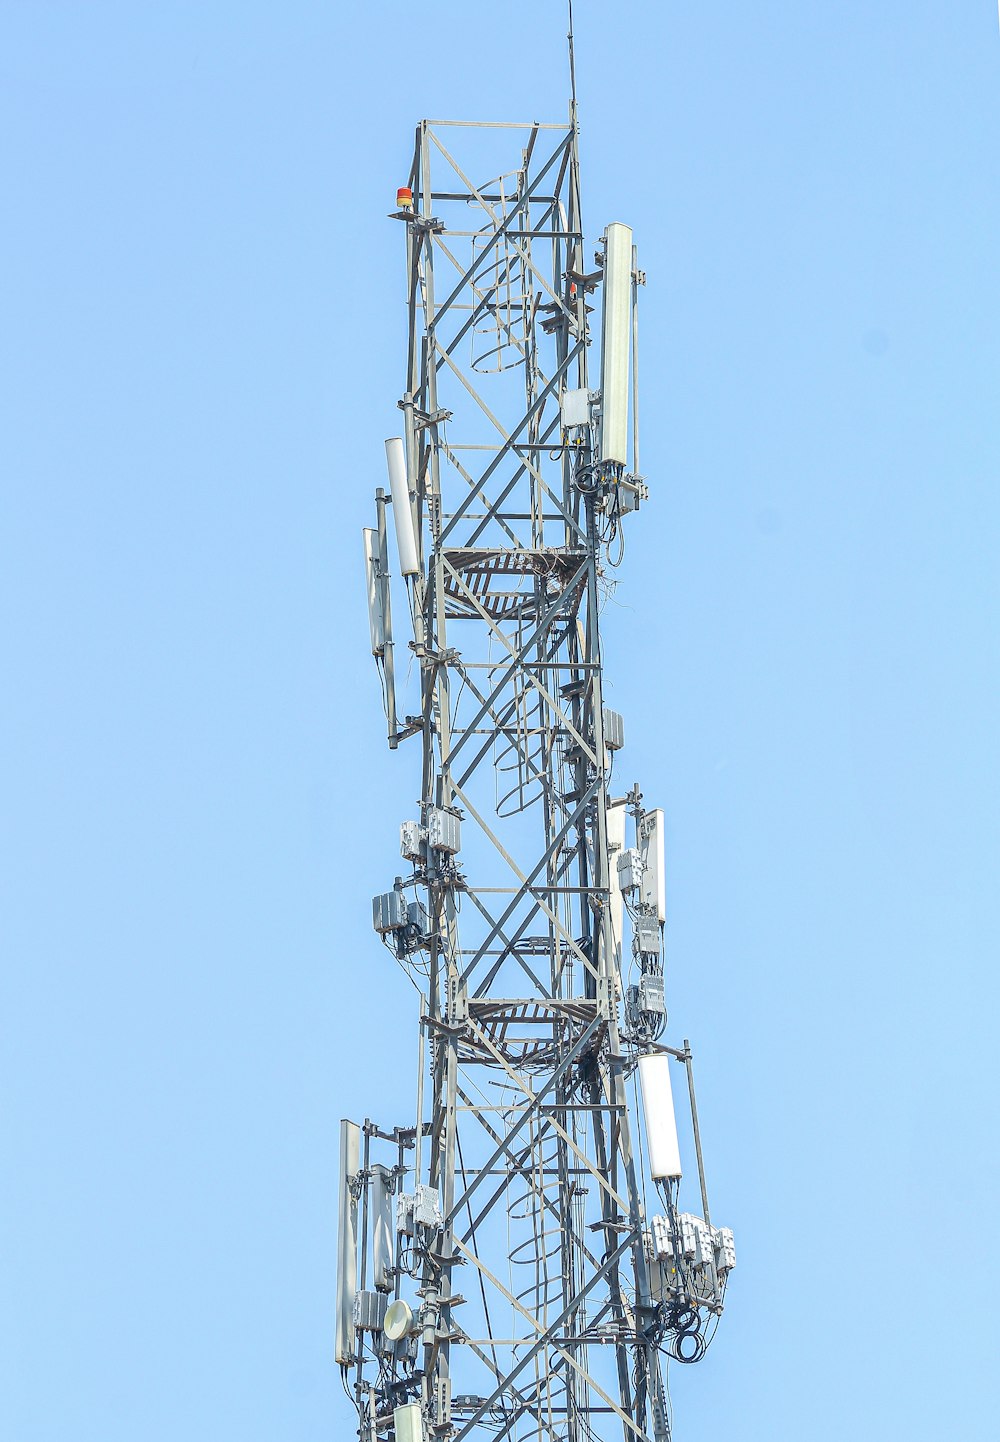 a very tall tower with lots of antennas on top of it